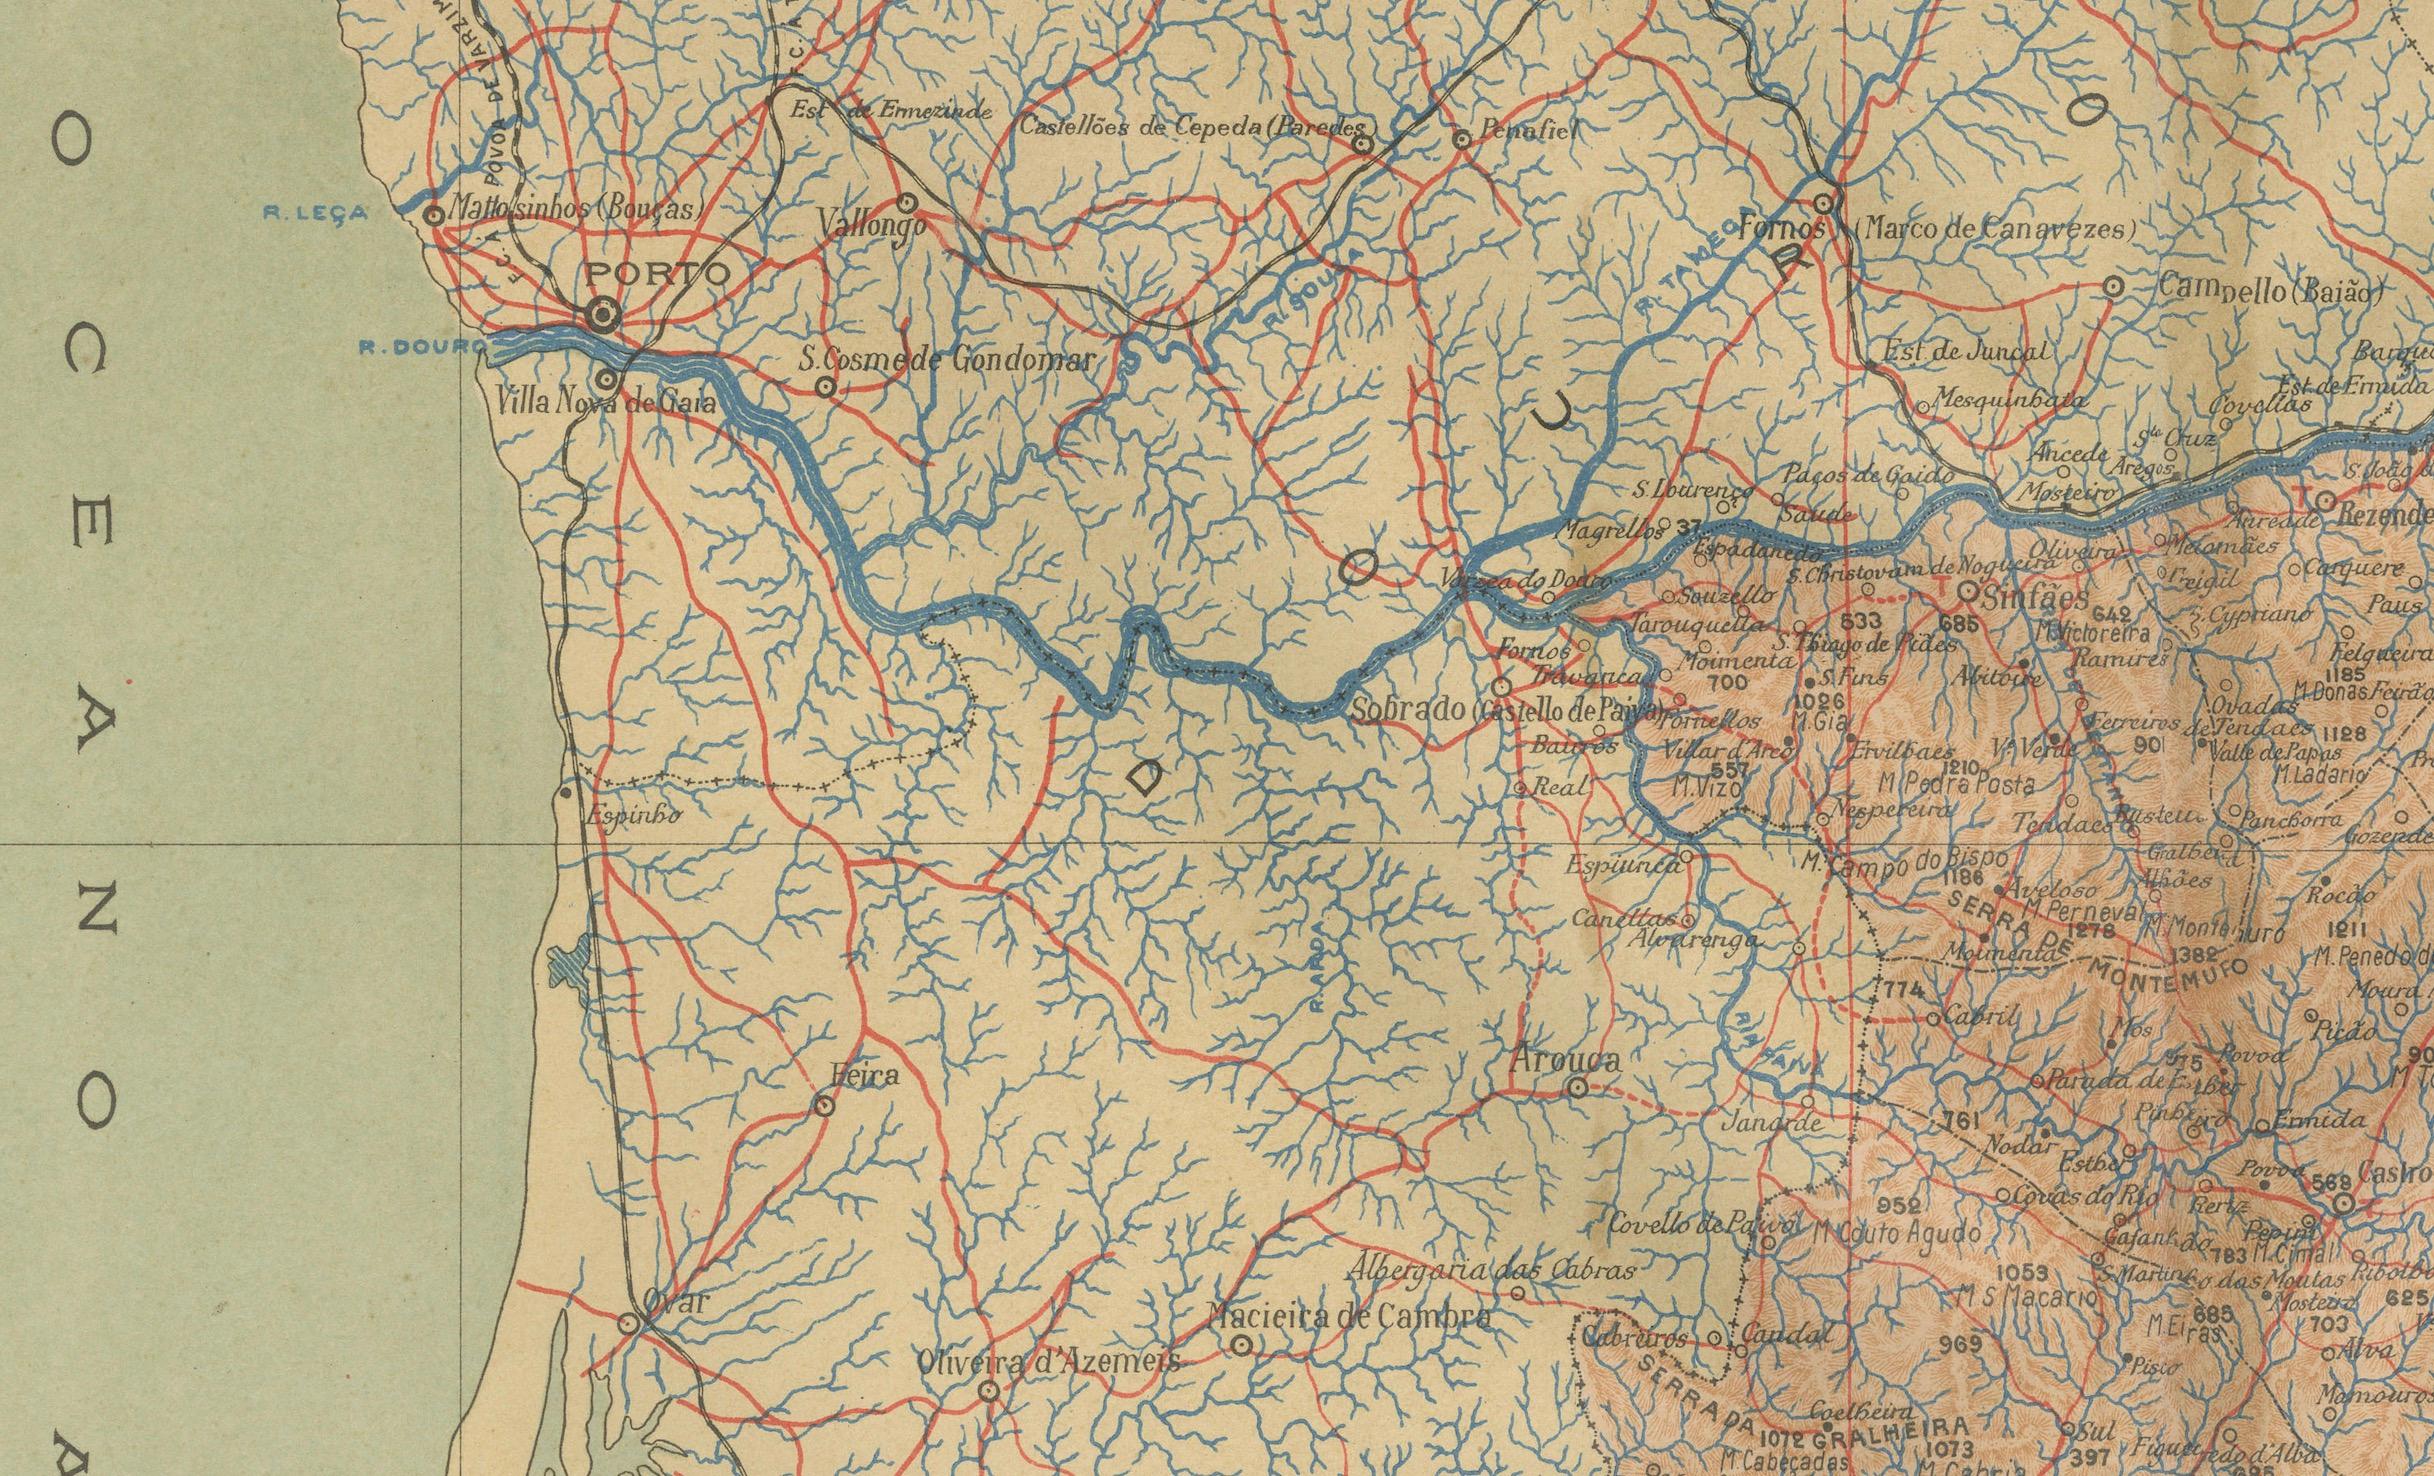 The uploaded image is a historical map of the Beira Alta region in Portugal. The map is detailed, showing the topography, hydrography, and transportation networks of the region, including railroads and roads. Beira Alta is located in the